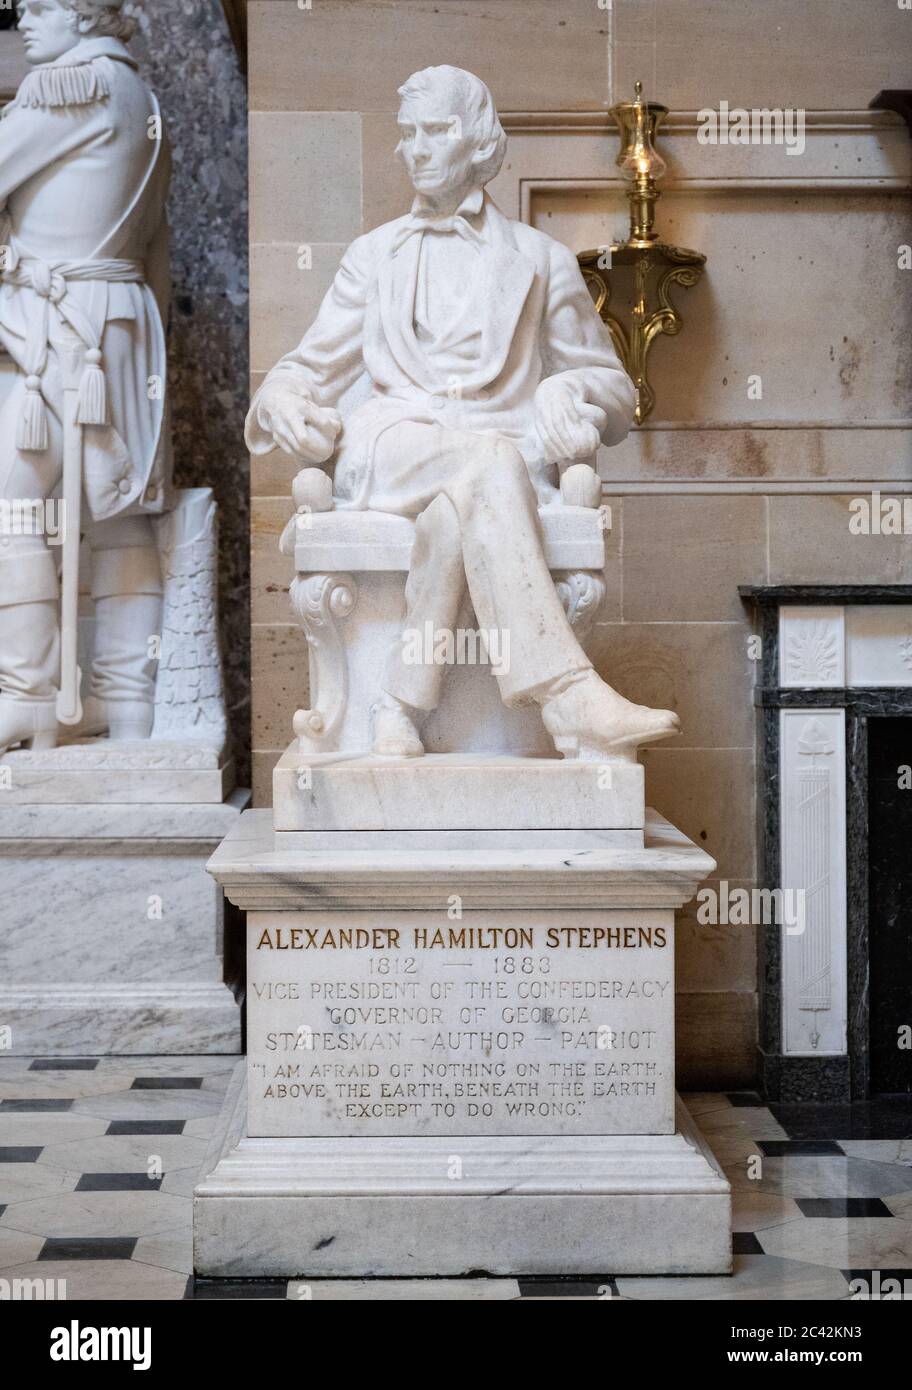 Washington, U.S. 23rd June, 2020. June 23, 2020 - Washington, DC, United States: Statue placed by the state of Georgia of Alexander Hamilton Stephens, vice president of the Confederate States, at the U.S. Capitol. (Photo by Michael Brochstein/Sipa USA) Credit: Sipa USA/Alamy Live News Stock Photo